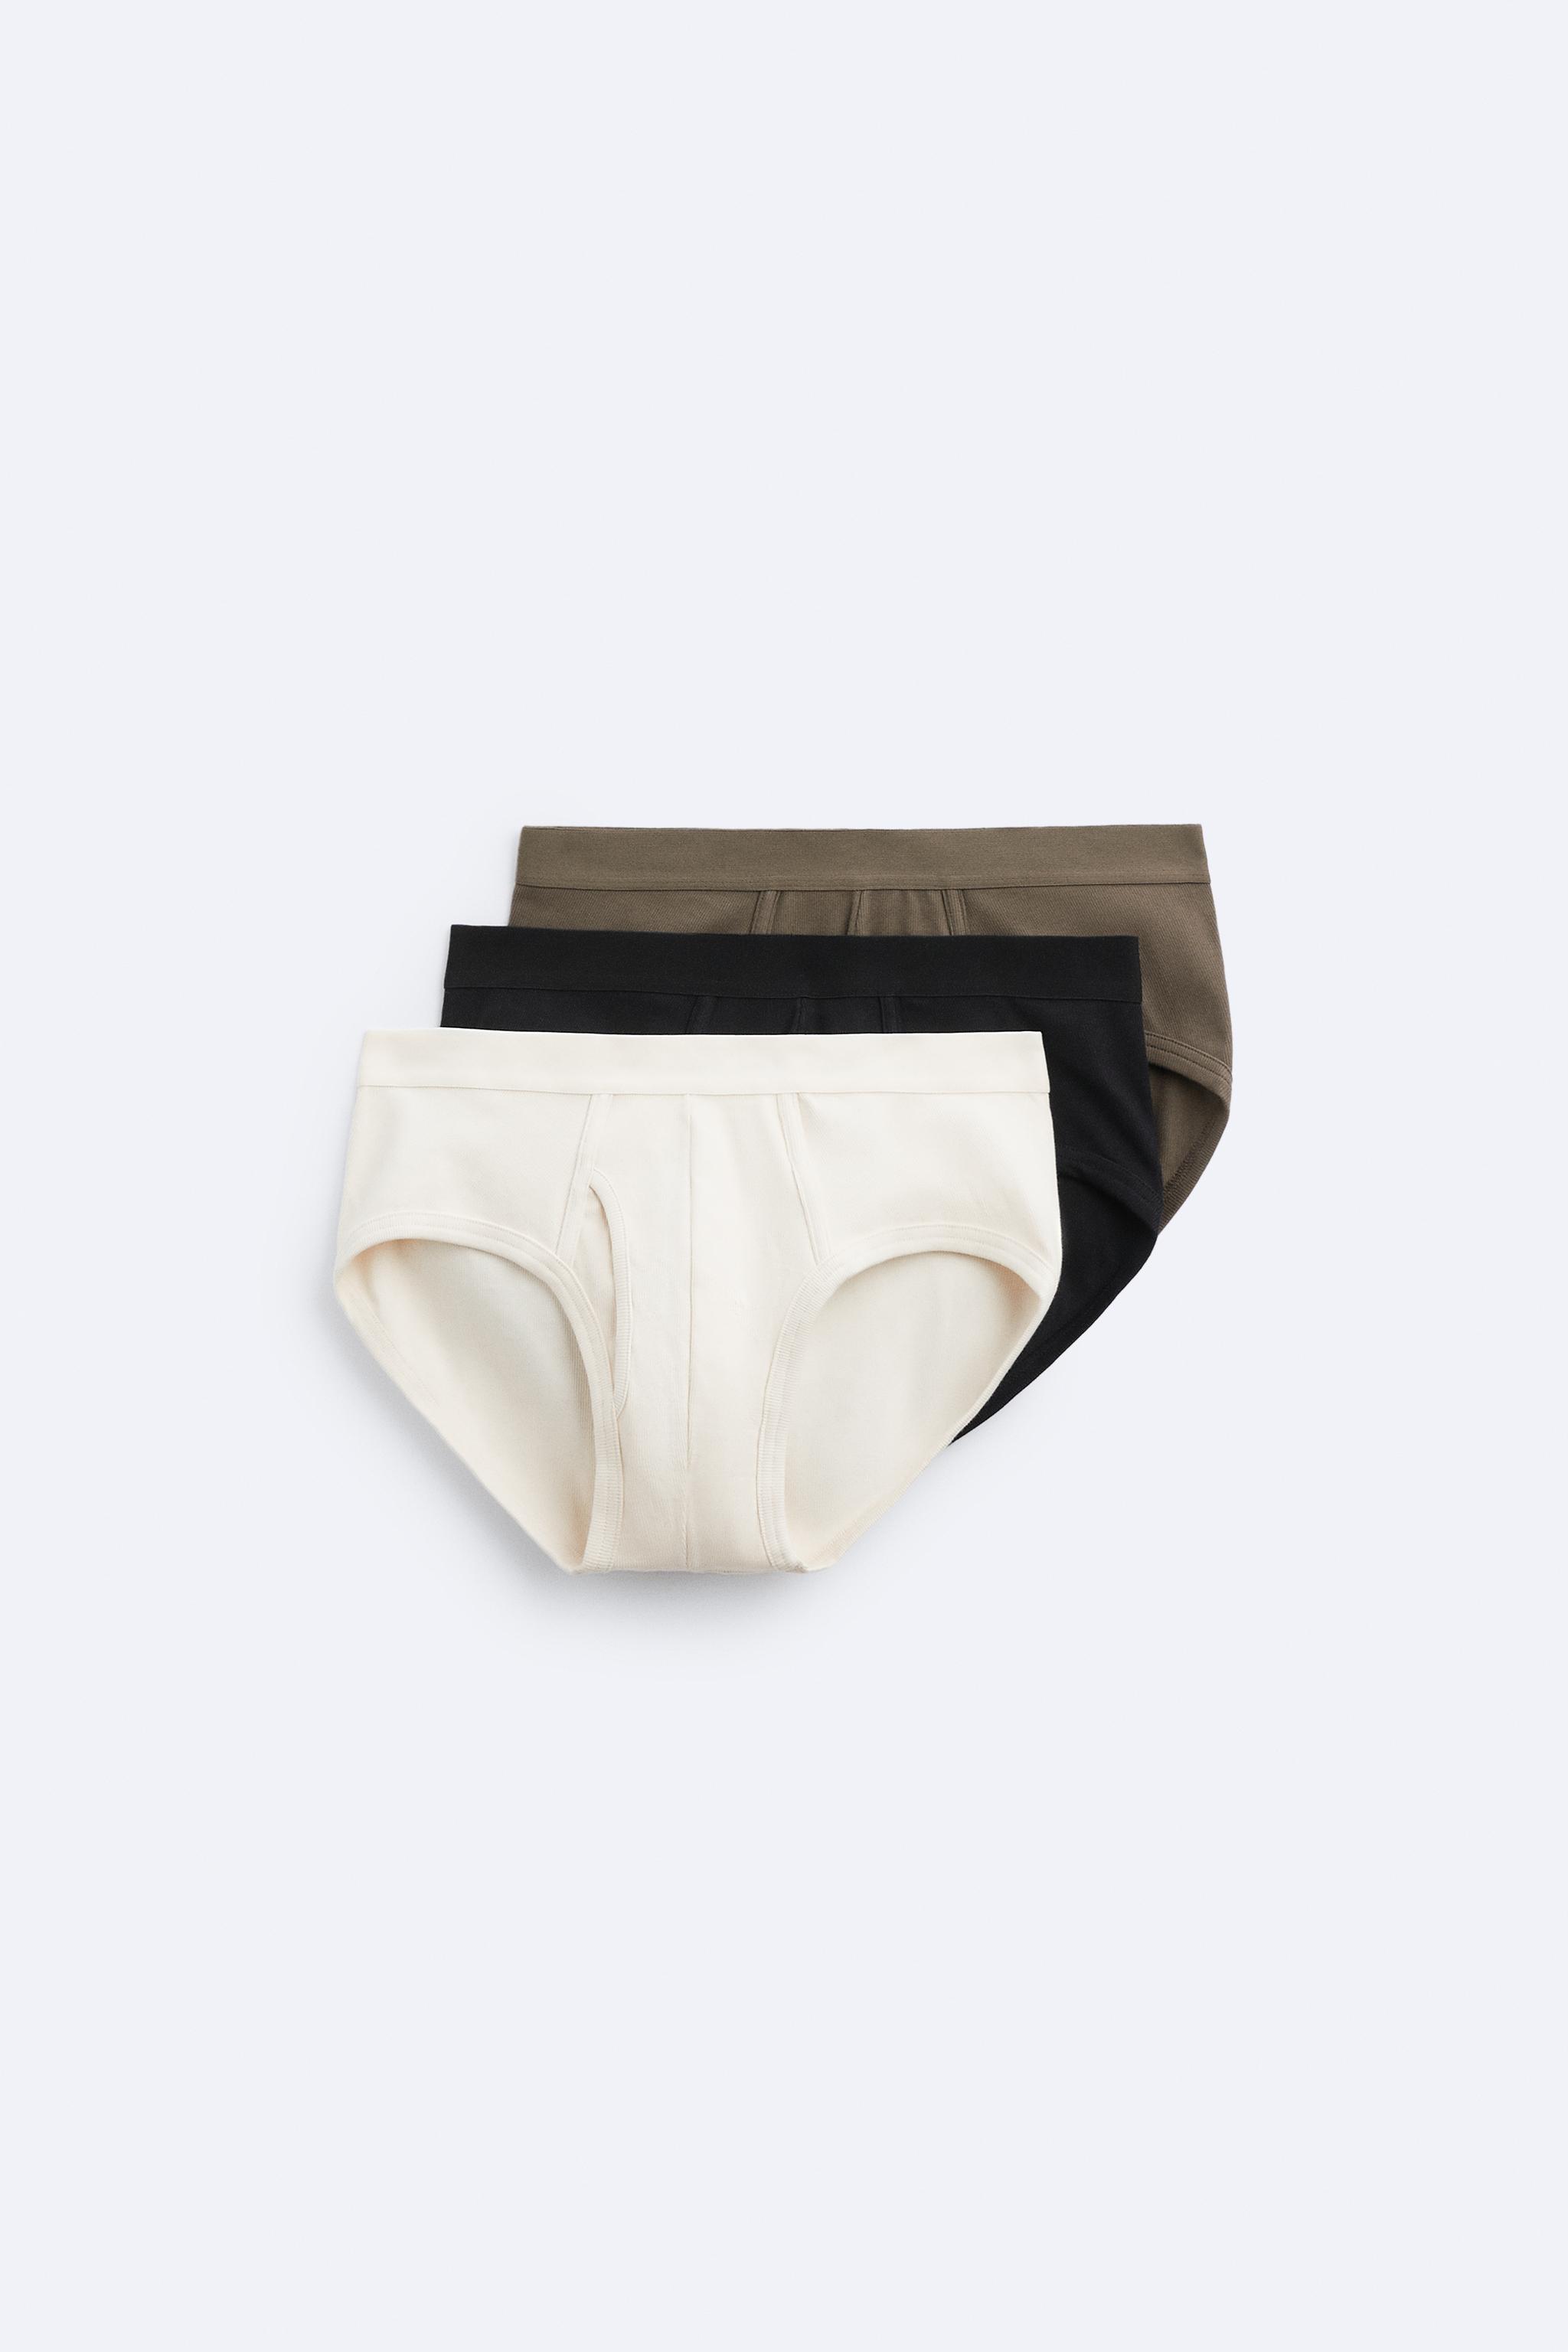 Zara Panties in Osu for sale ▷ Prices on